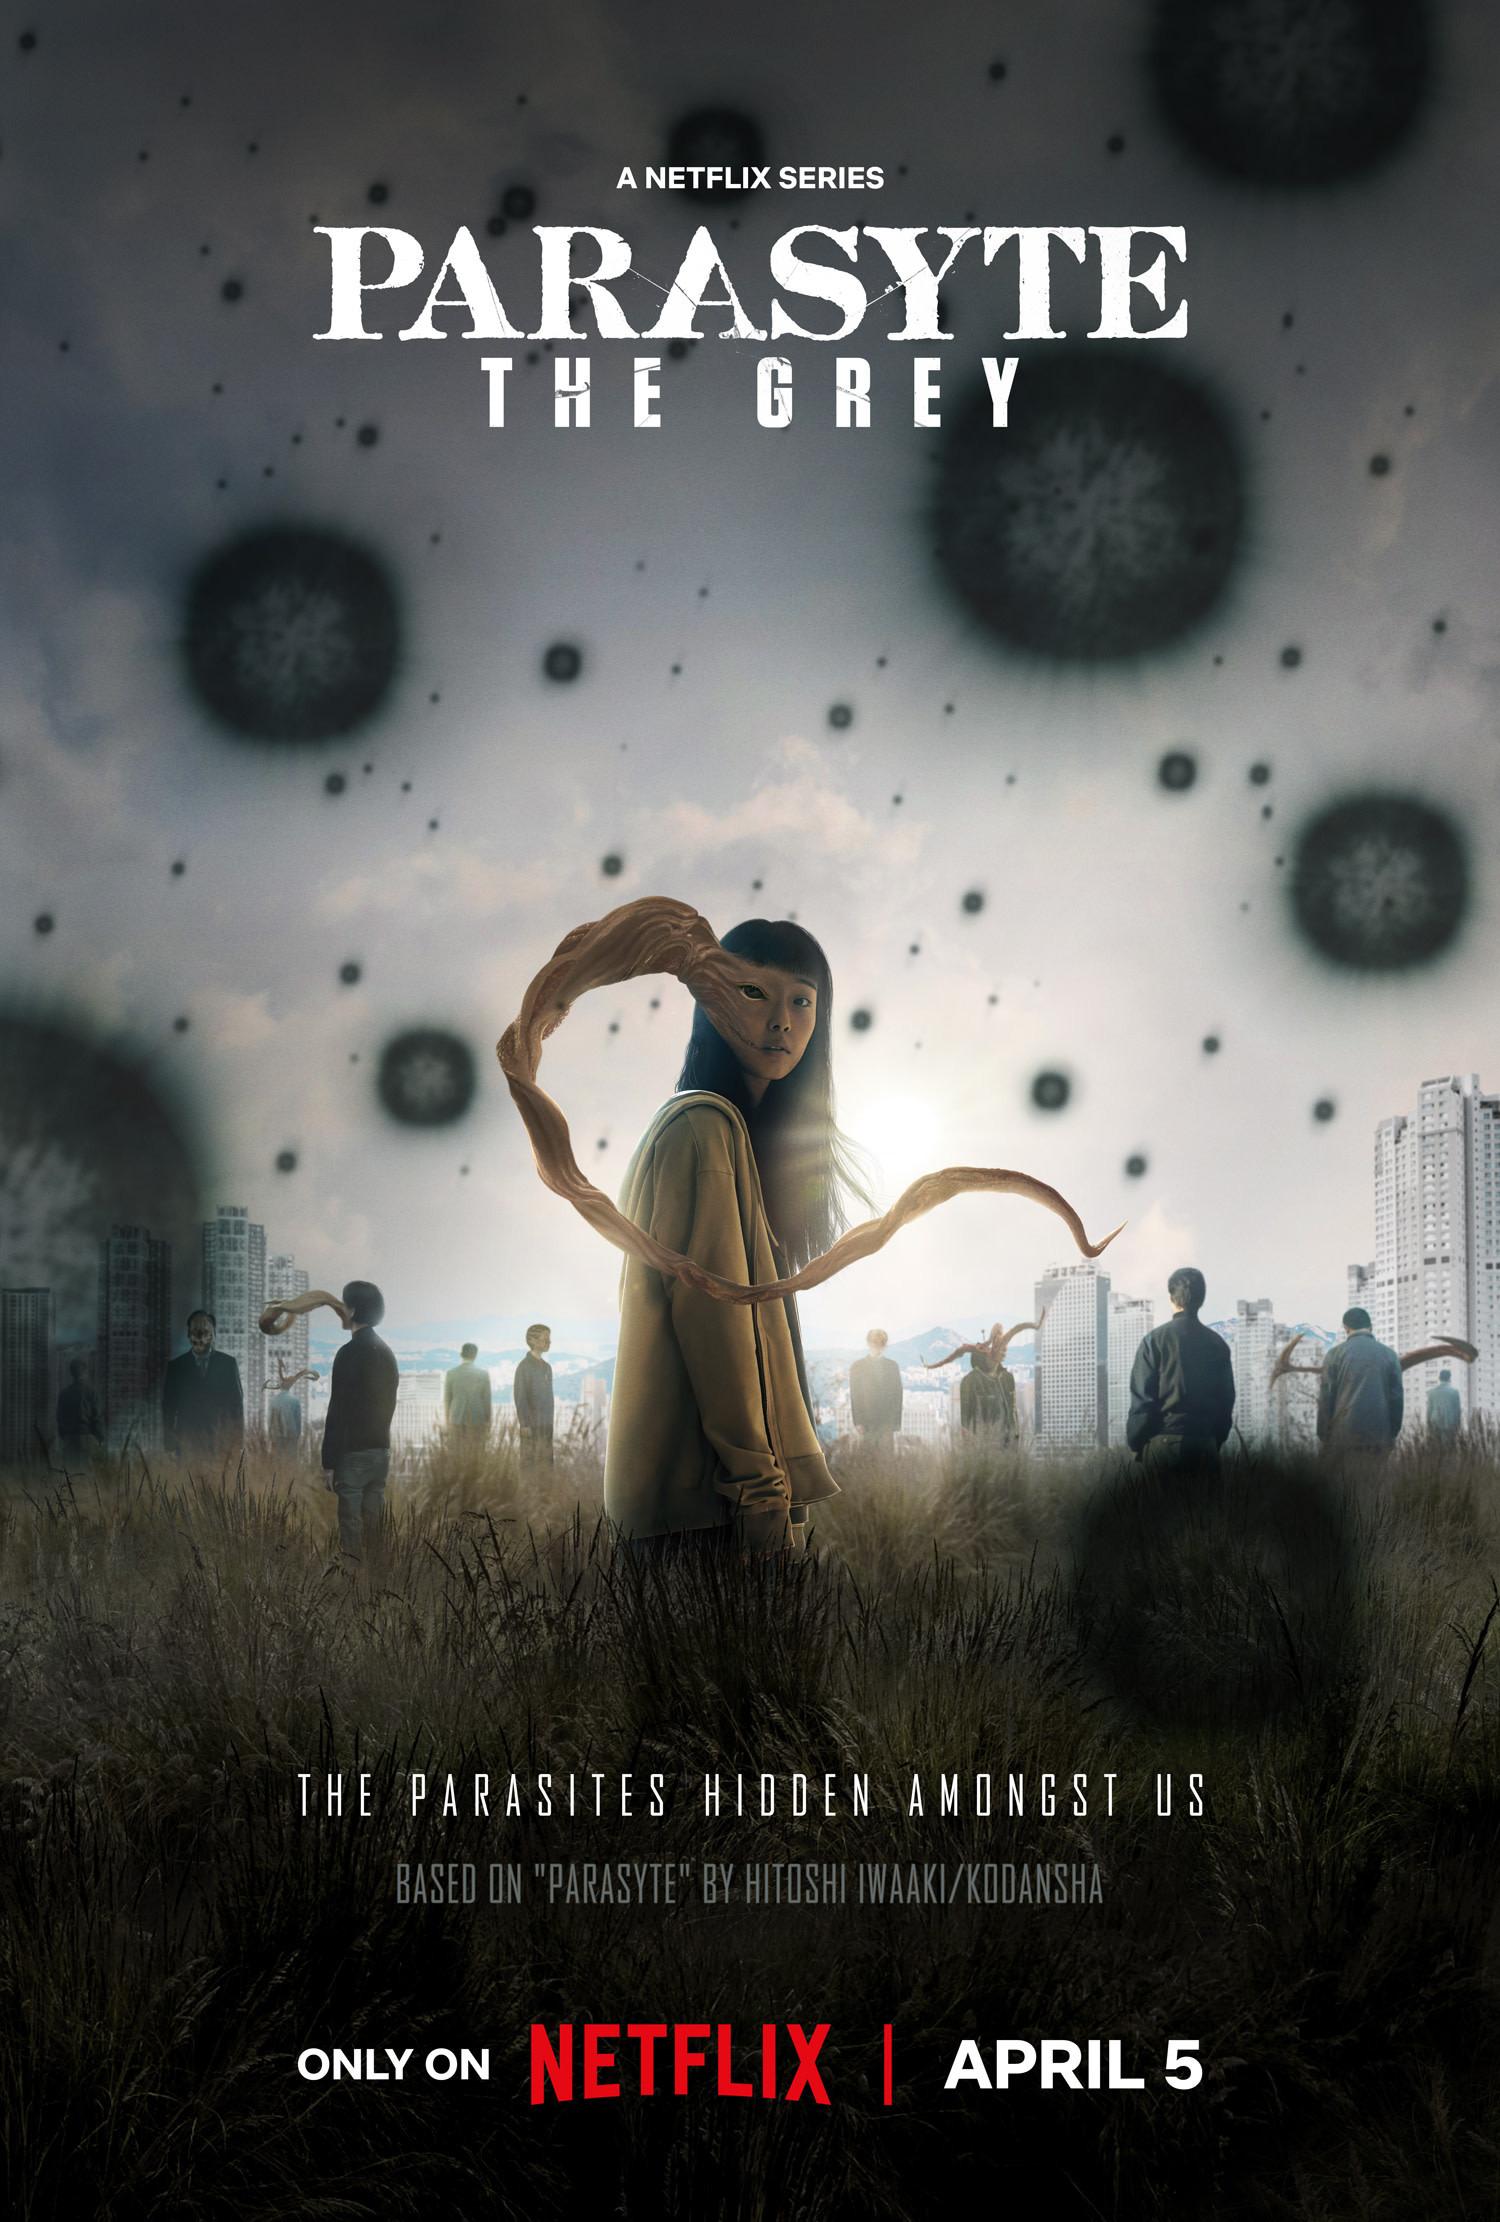 Parasyte: The Grey (April 5, Netflix)Prepare for an epic showdown against parasitic invaders in this South Korean original series. Parasyte: The Grey follows a group of individuals as they band together to combat these otherworldly threats, leading to a gripping tale of survival and sacrifice.